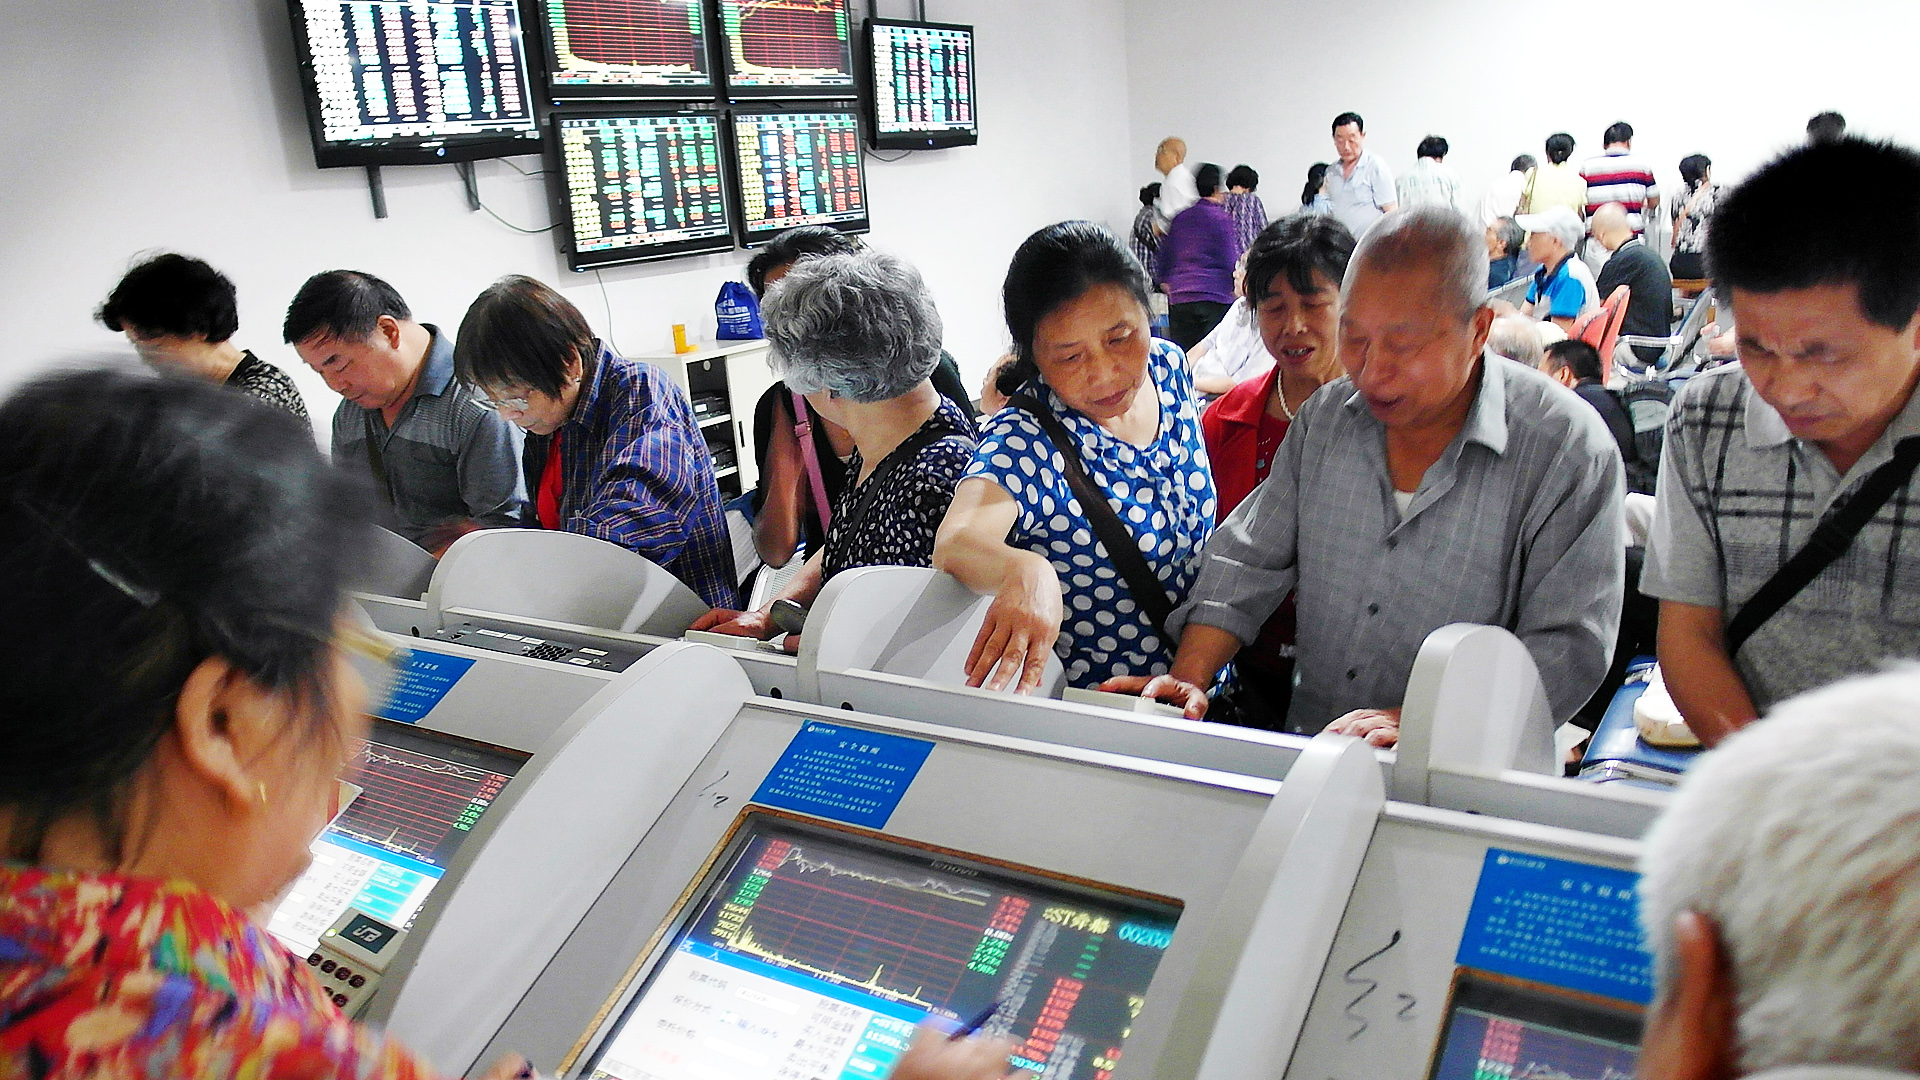 Investors look over stock prices on display terminals at a brokerage house in Yichang, Hubei province. Photo: AP